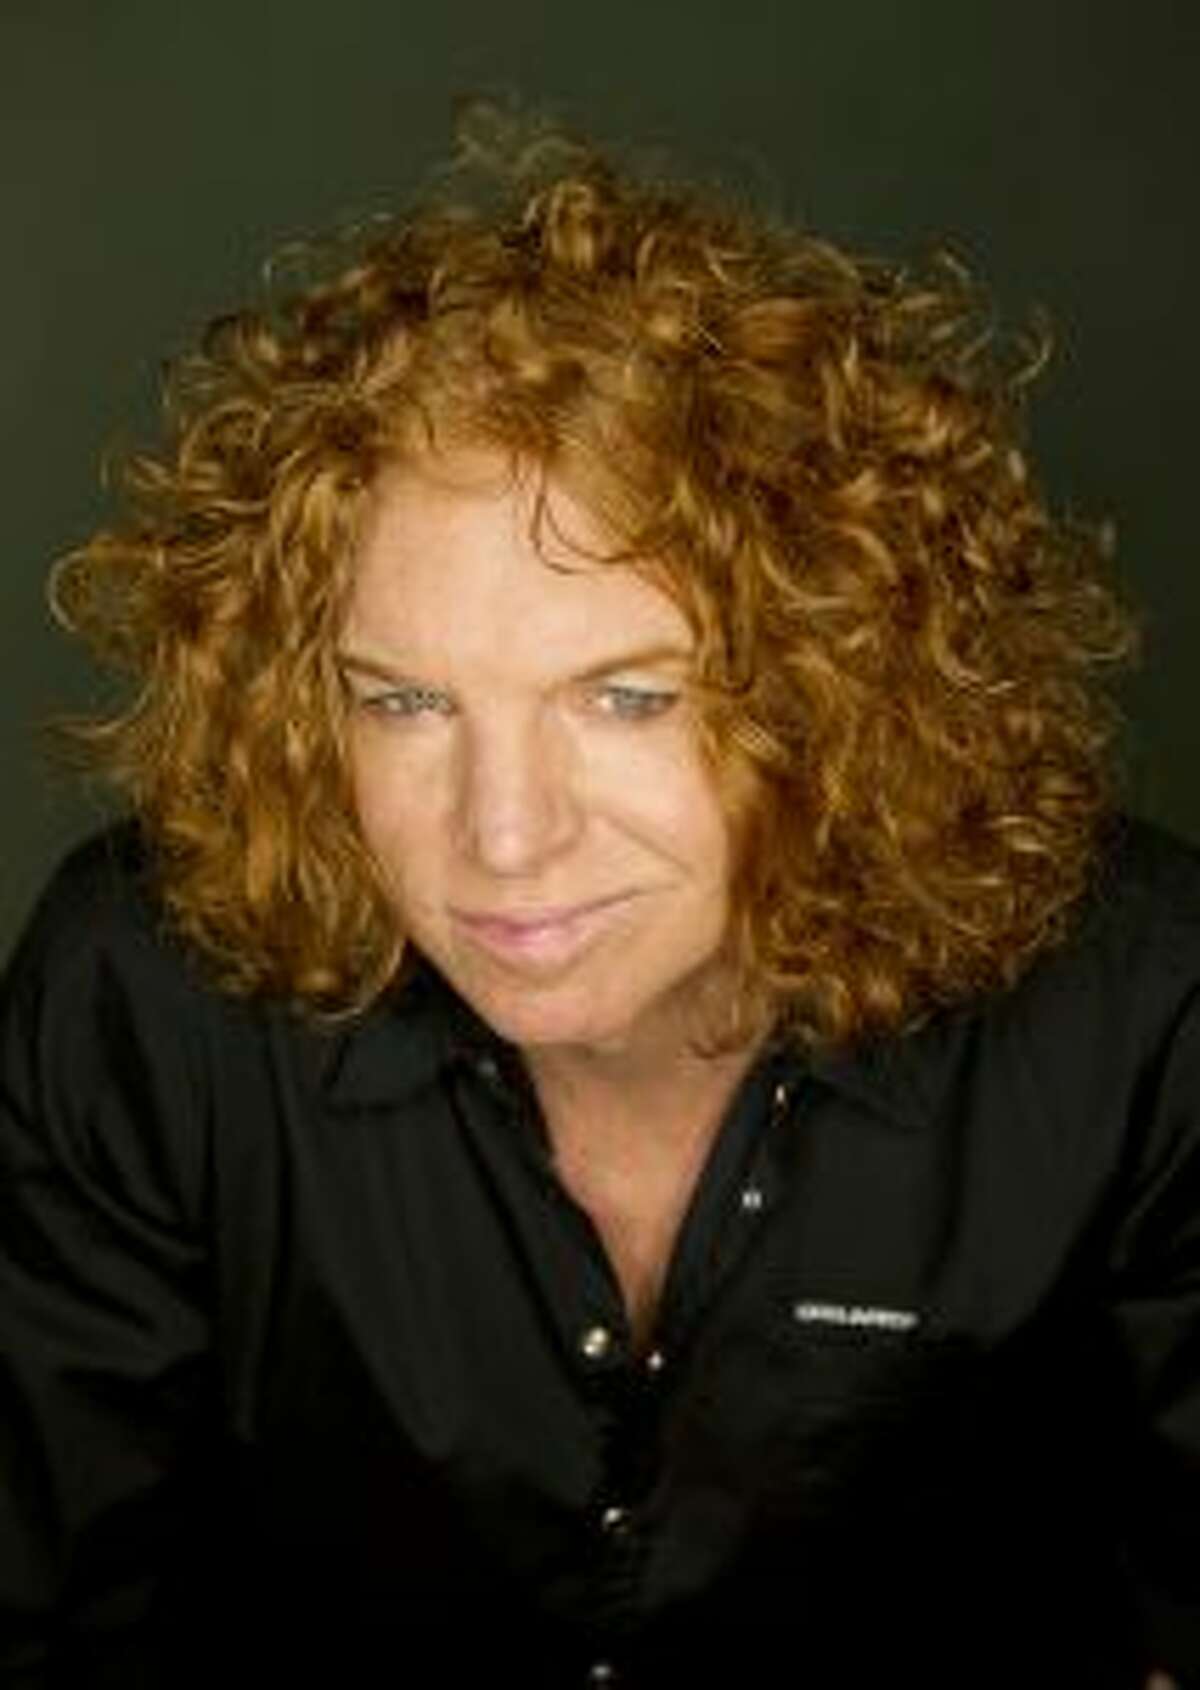 Carrot Top will perform at 8 p.m. on May 18 at the Little River Casino Resort. (Courtesy photo/Denise Truscello)